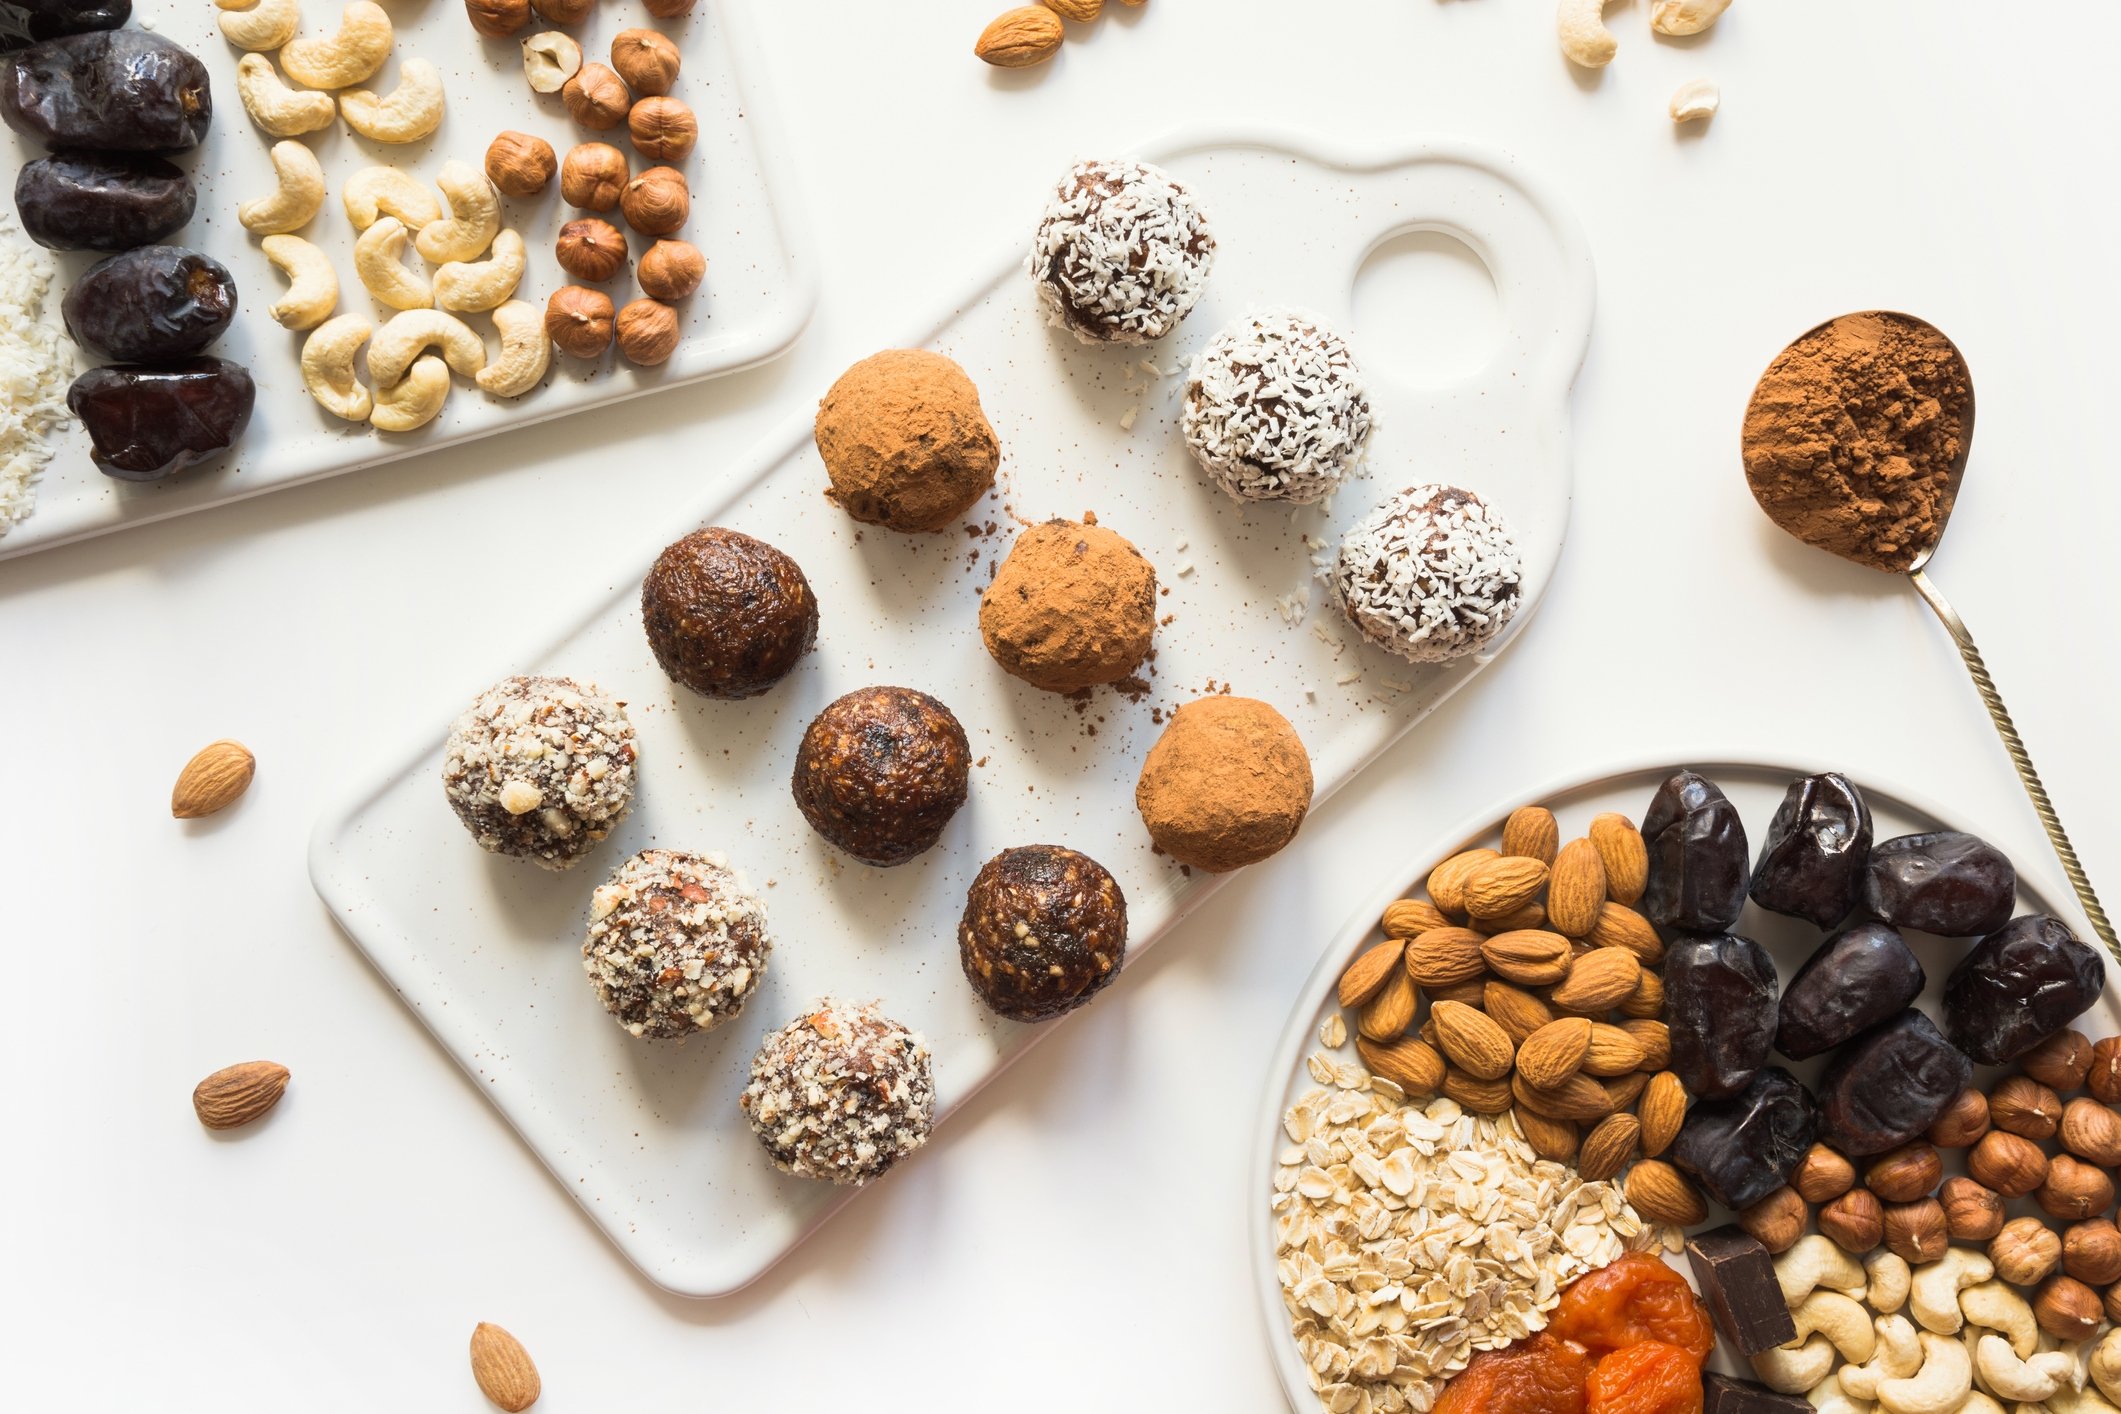 You can dip your date energy balls in cacao, cinnamon, nuts, coconut flakes or anything you like. (iStock Photo)